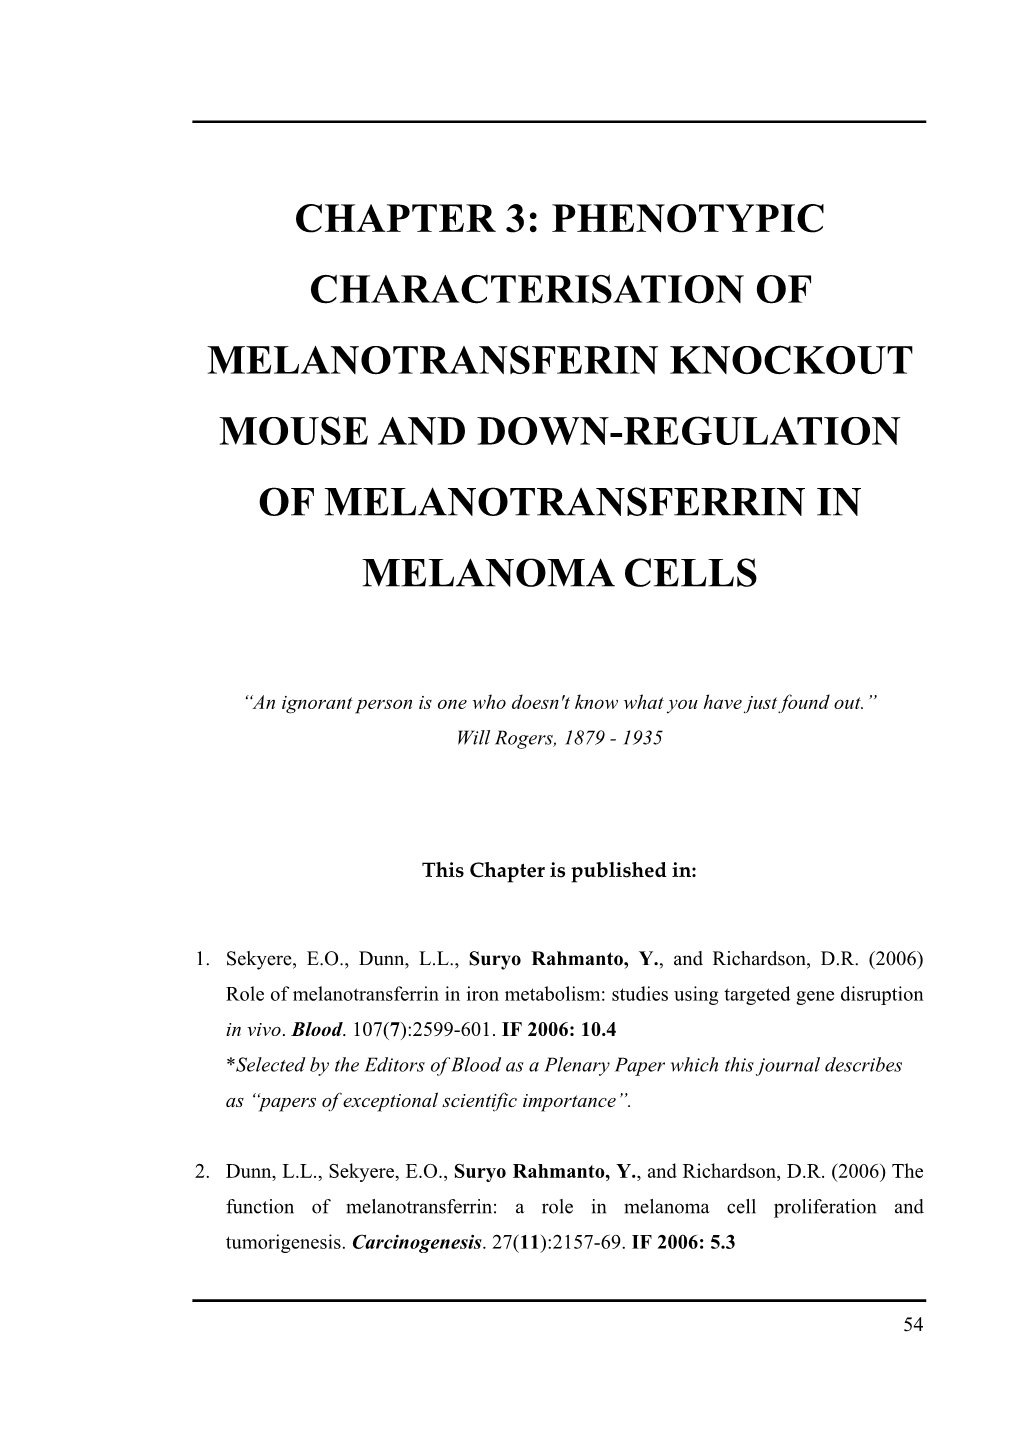 Chapter 3: Phenotypic Characterisation of Melanotransferin Knockout Mouse and Down-Regulation of Melanotransferrin in Melanoma Cells